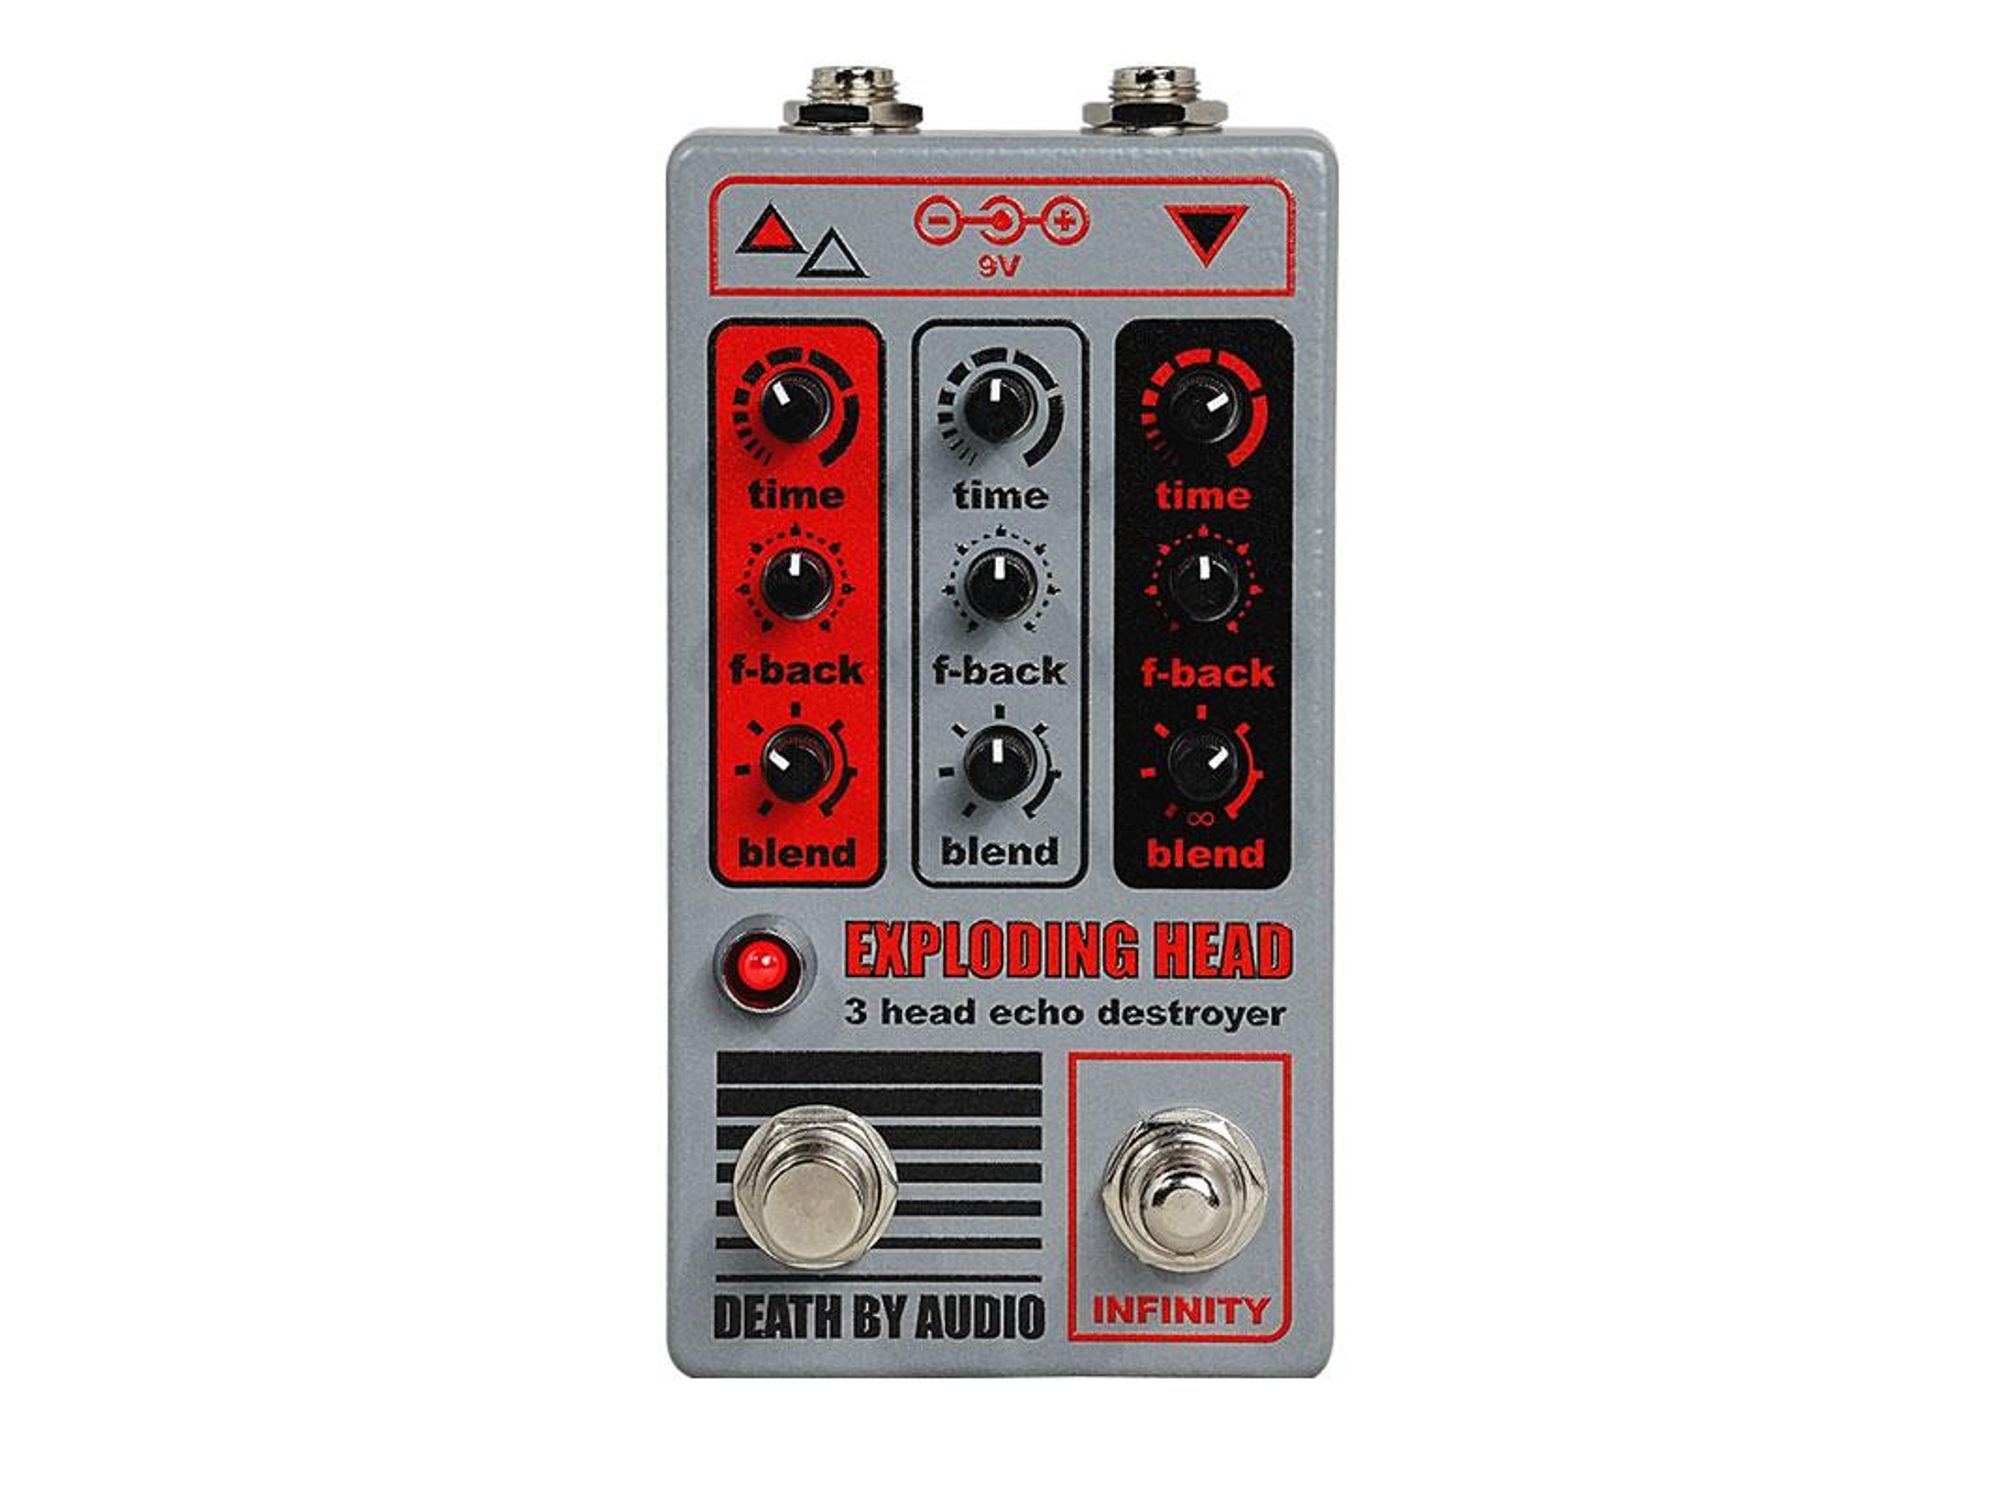 Death By Audio Announces Limited- Edition Exploding Head Delay